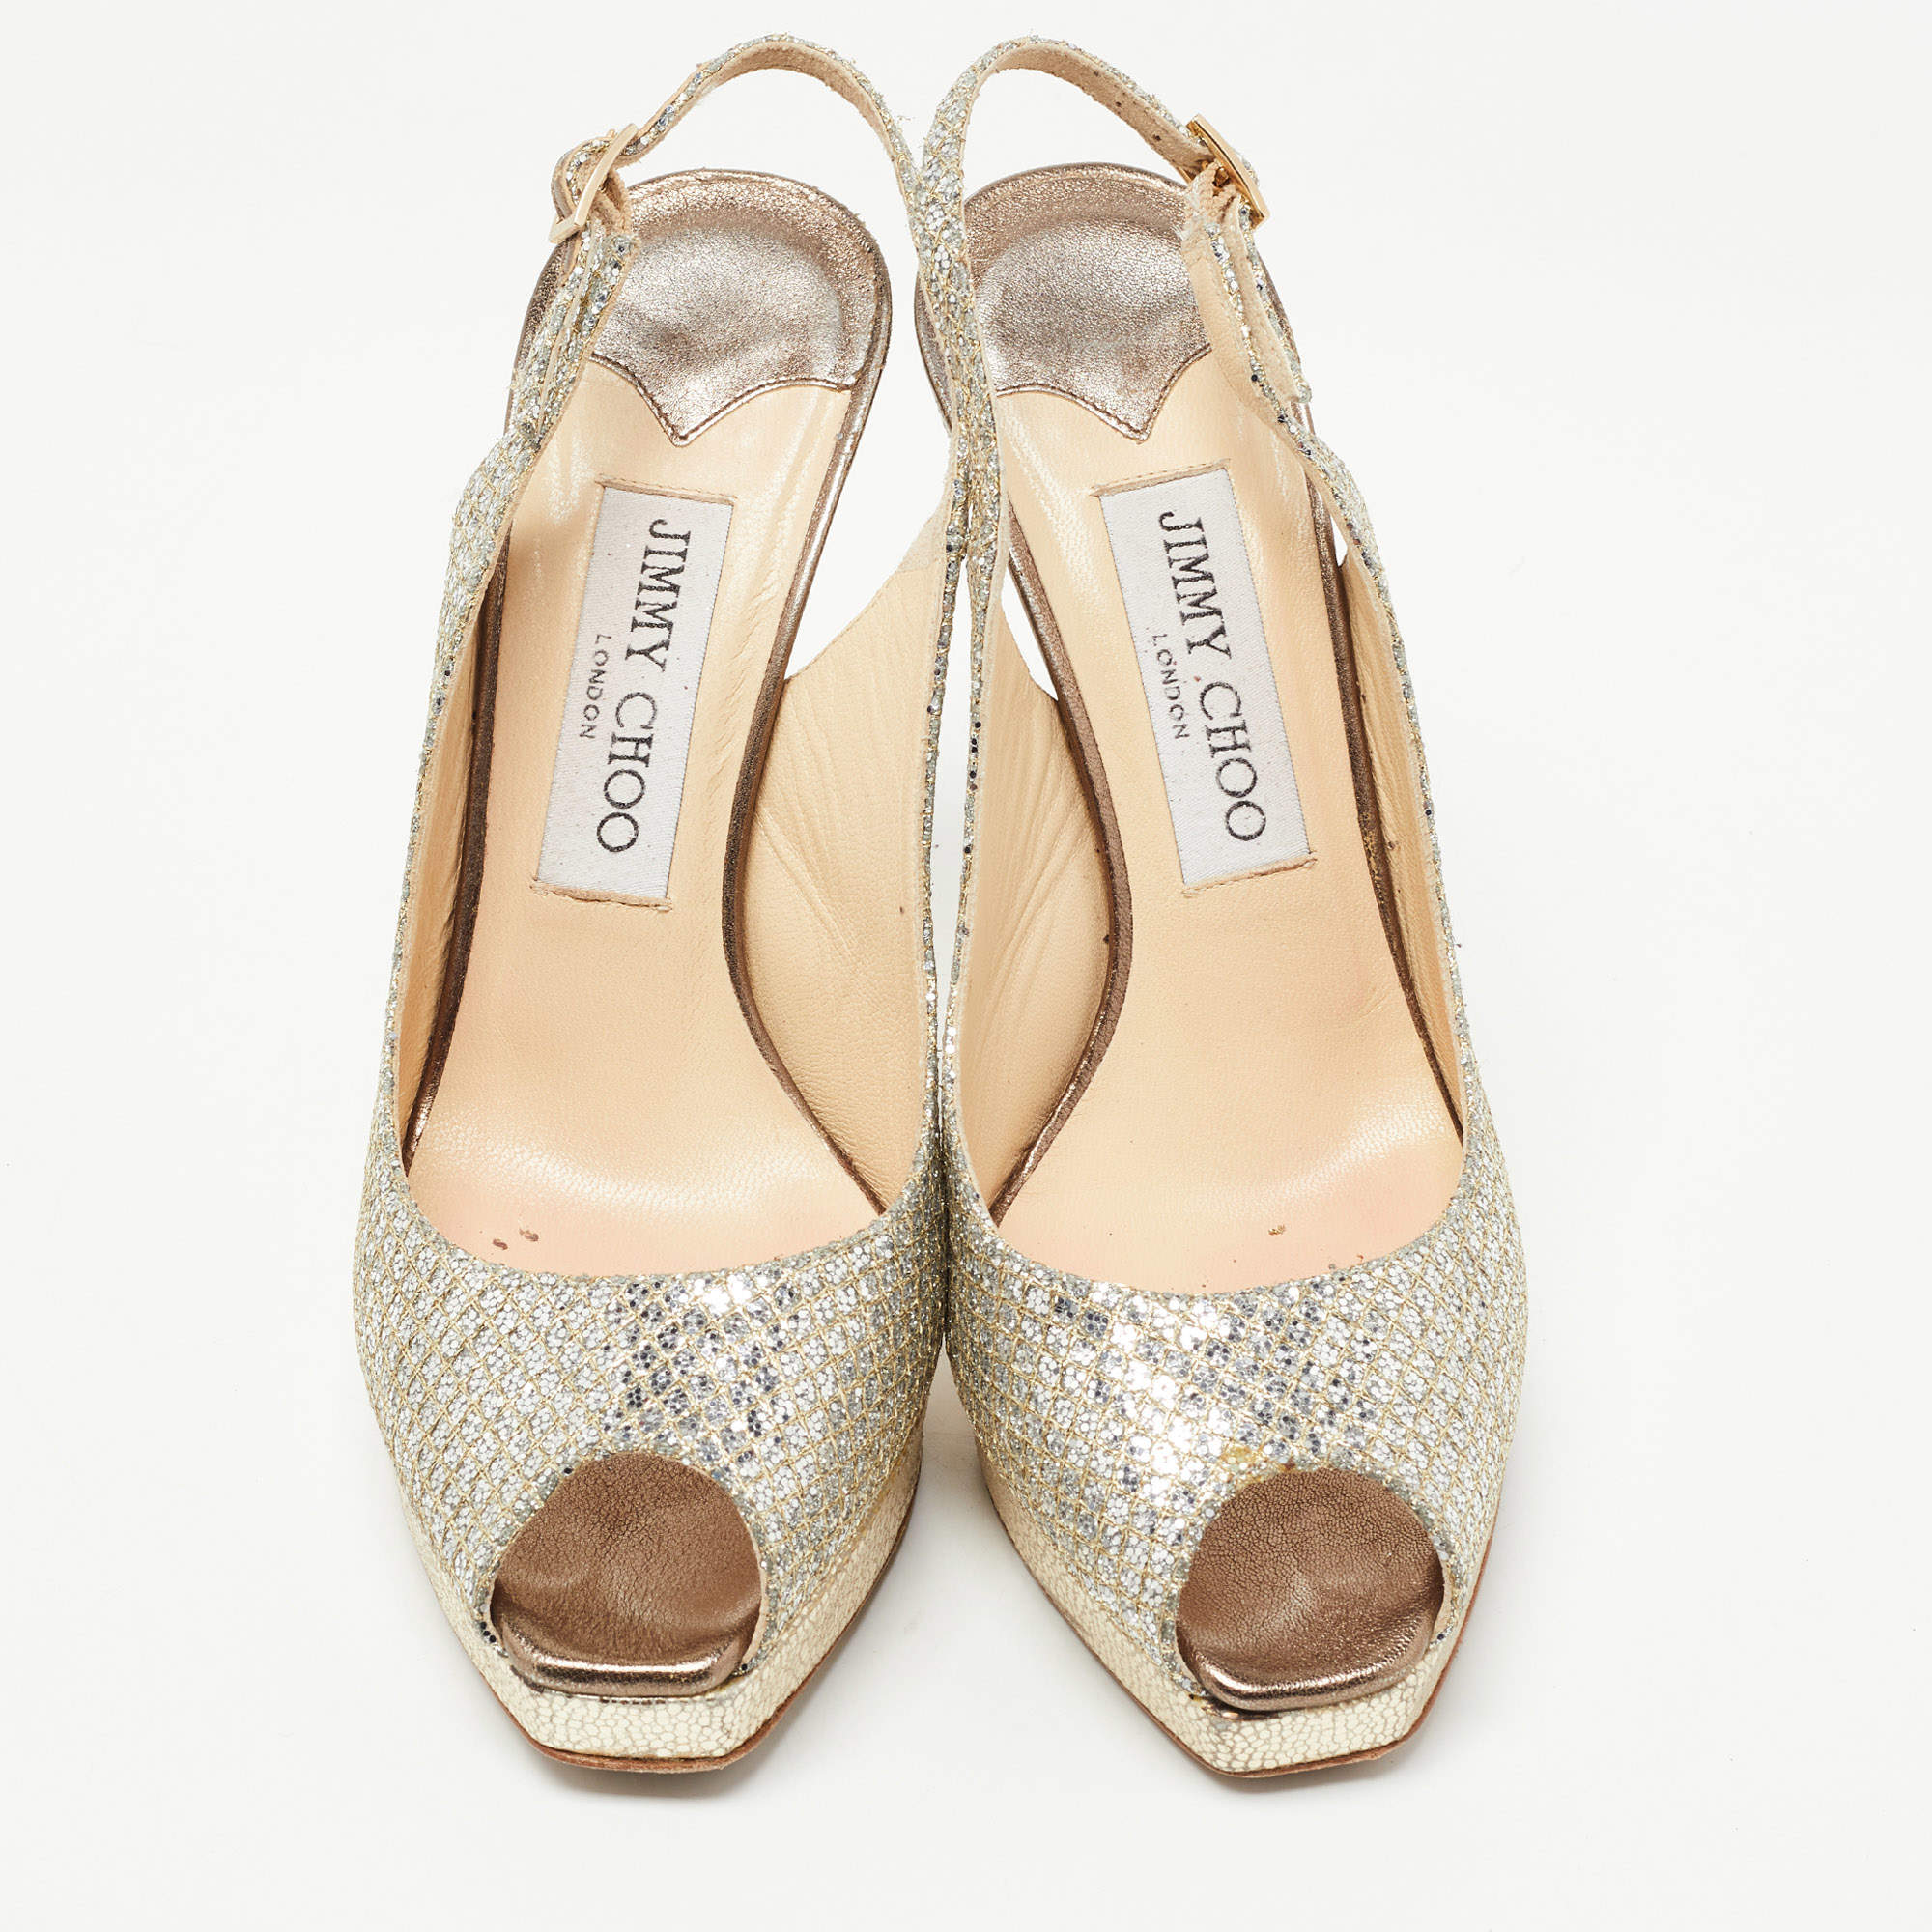 Jimmy Choo Clue Gold Glitter Sparkle Peep Toe Sling Back High Heels Pumps  Shoes Size 9.5 - $100 - From Galore